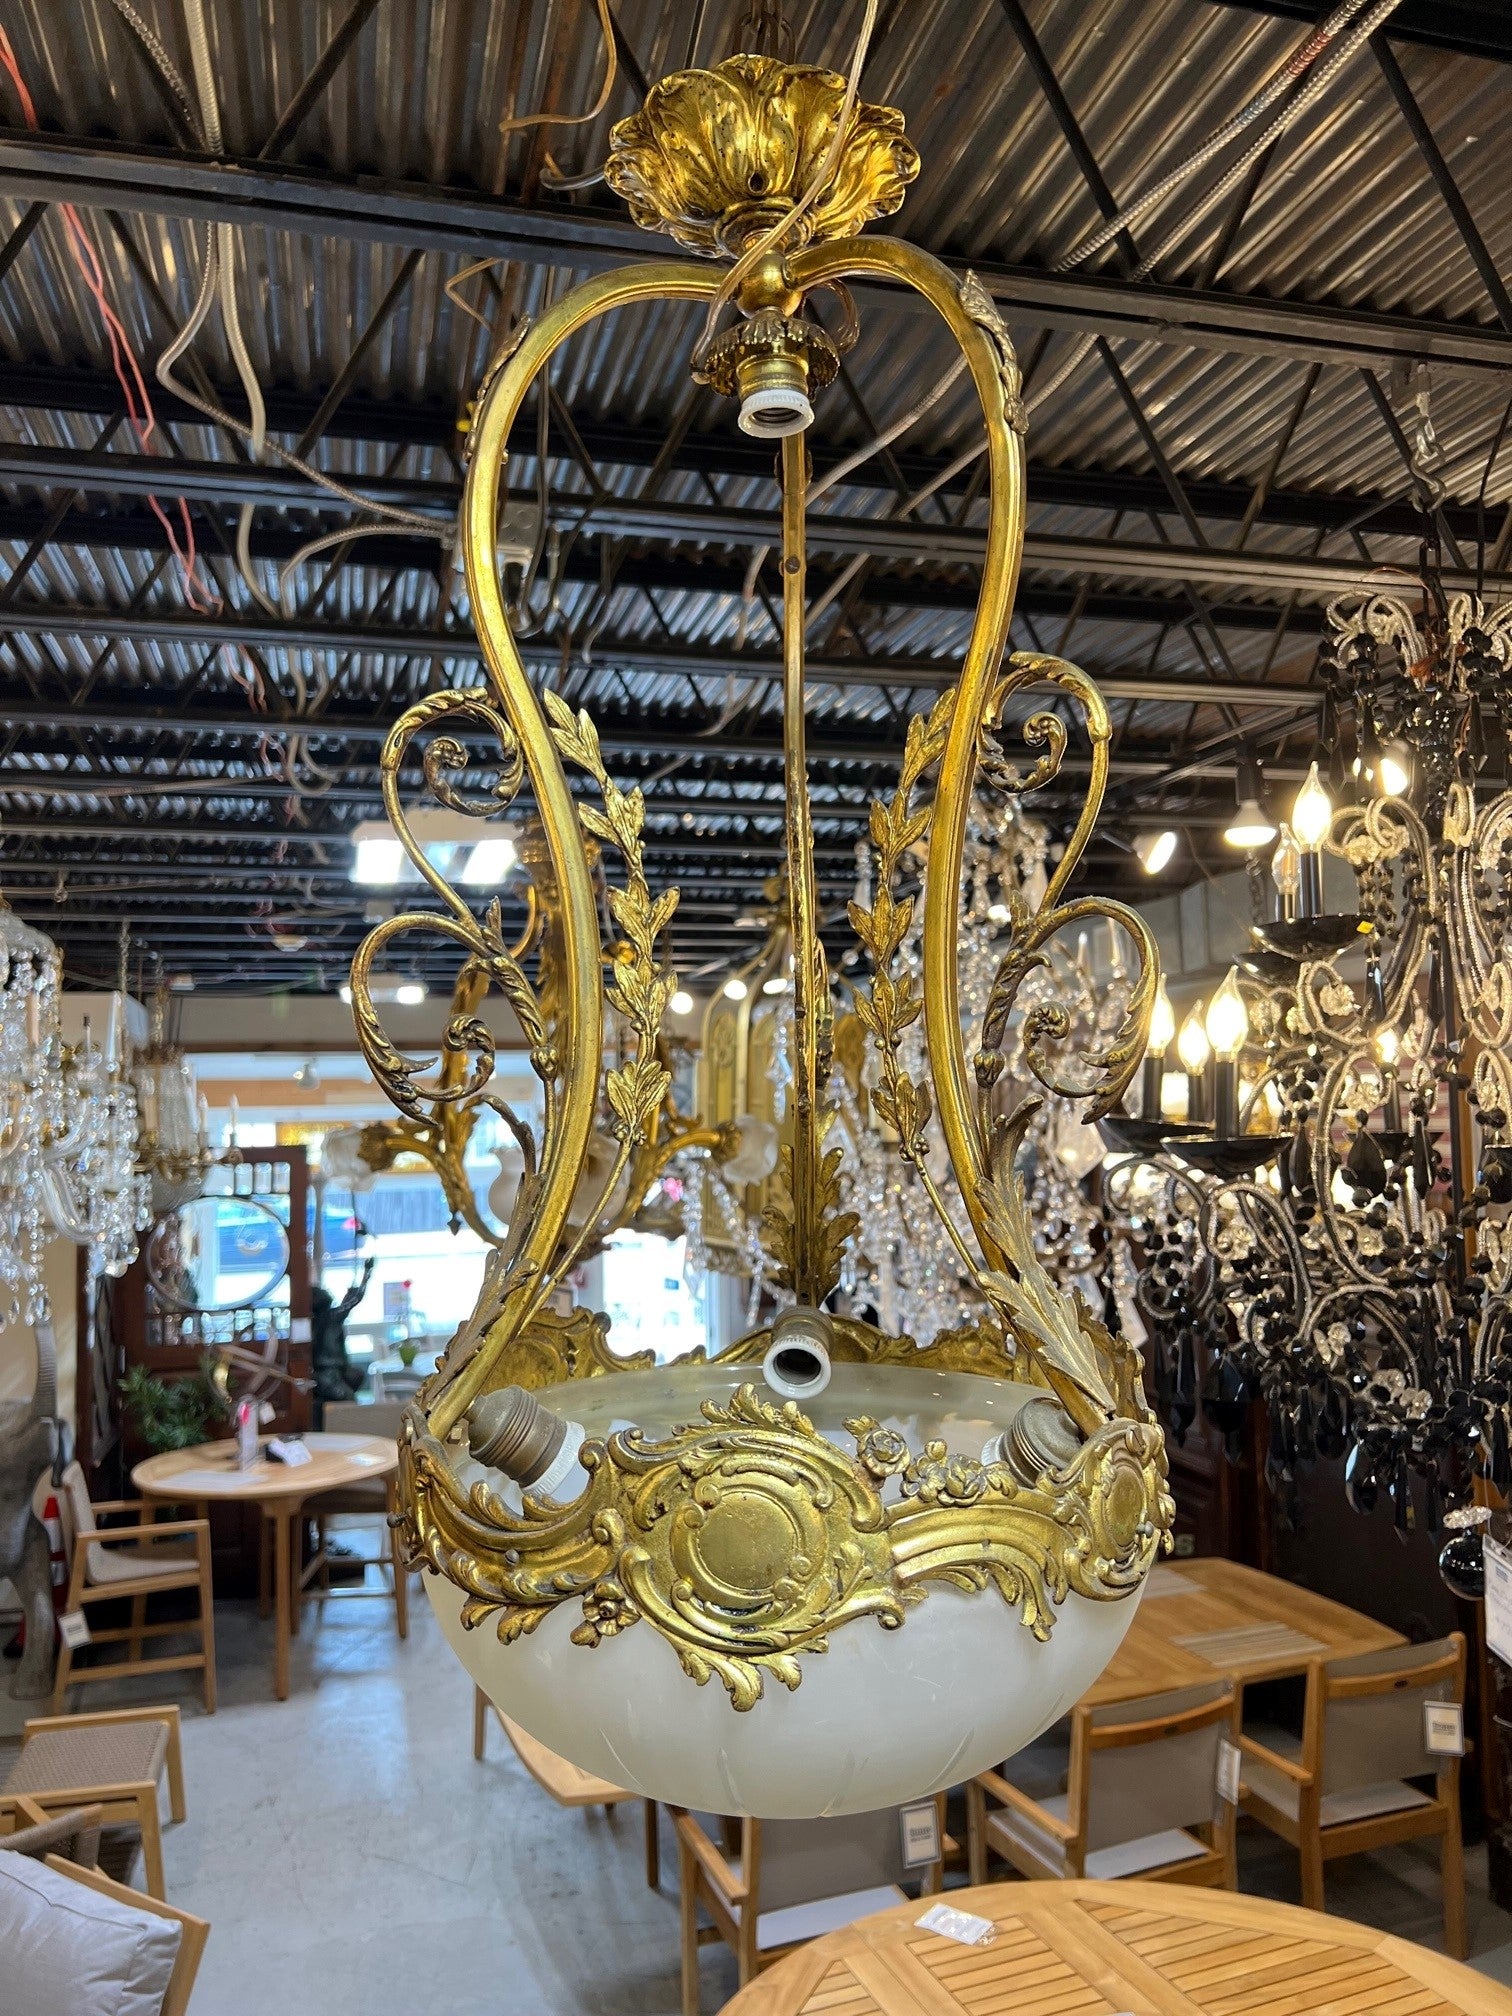 Early 20th century bronze hanging chandelier with a cut glass bowl. Beautiful bronze filigree around the top of the bowl and decorative arms. A glass shade is missing on the top and looks like it was rewired but still has the original sockets should